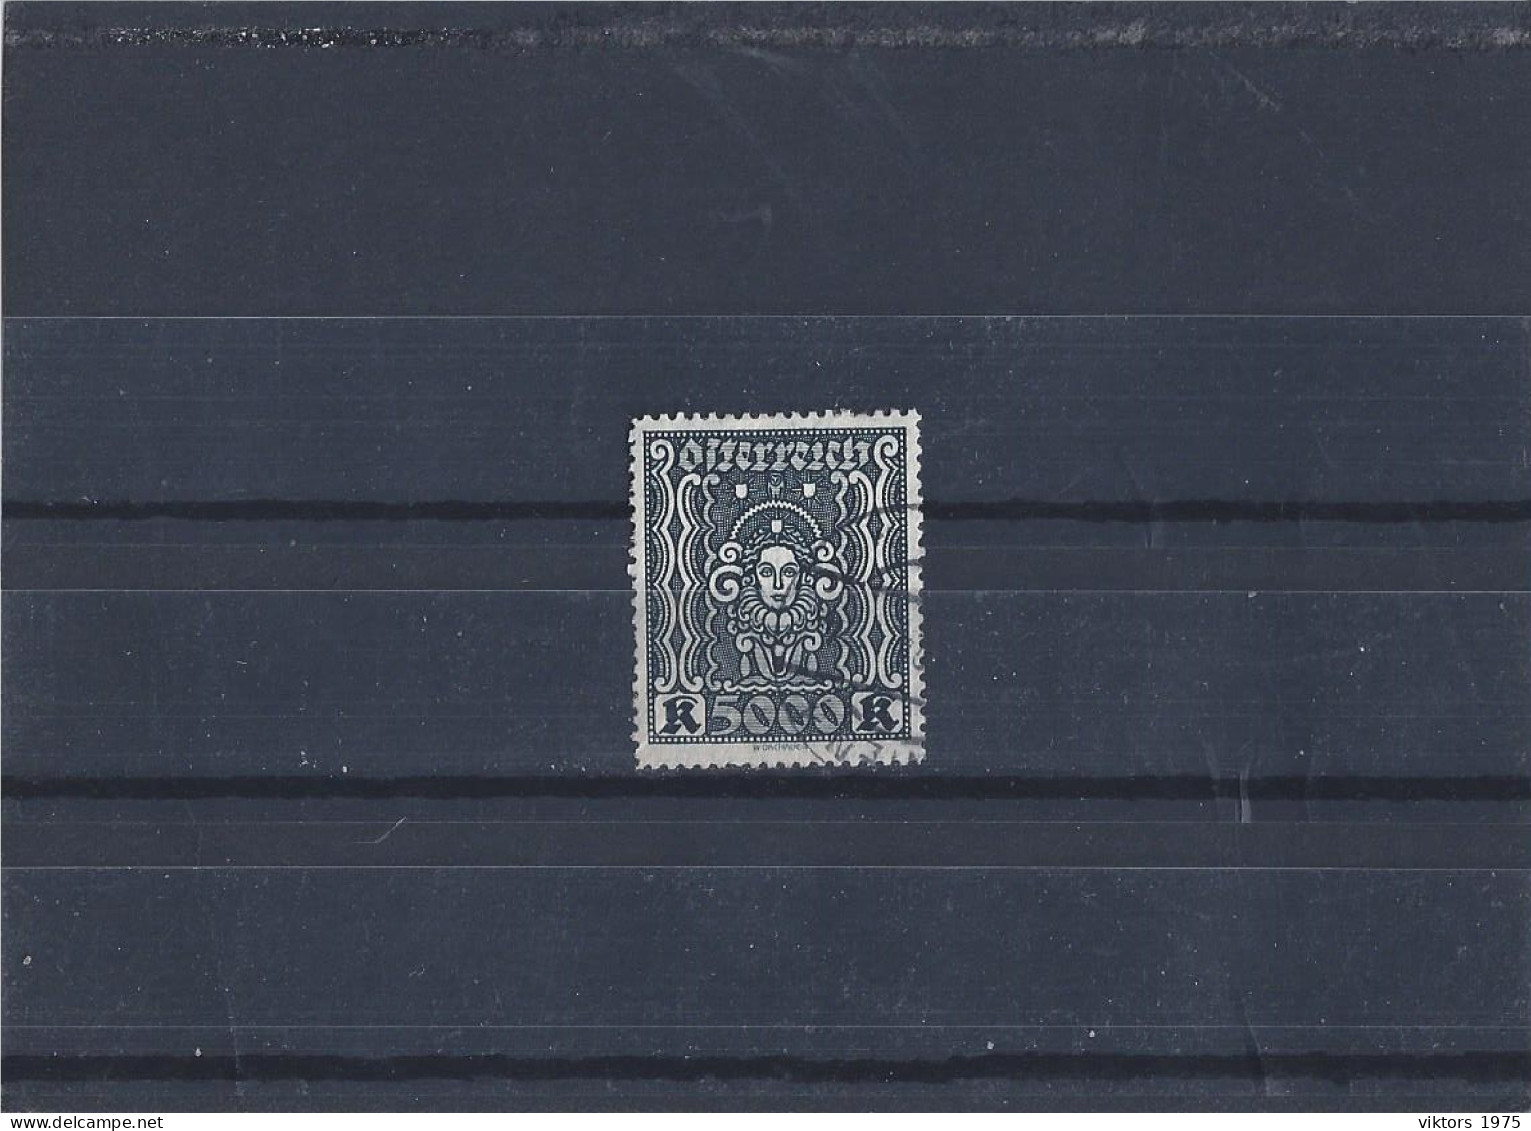 Used Stamp Nr.407 In MICHEL Catalog - Used Stamps